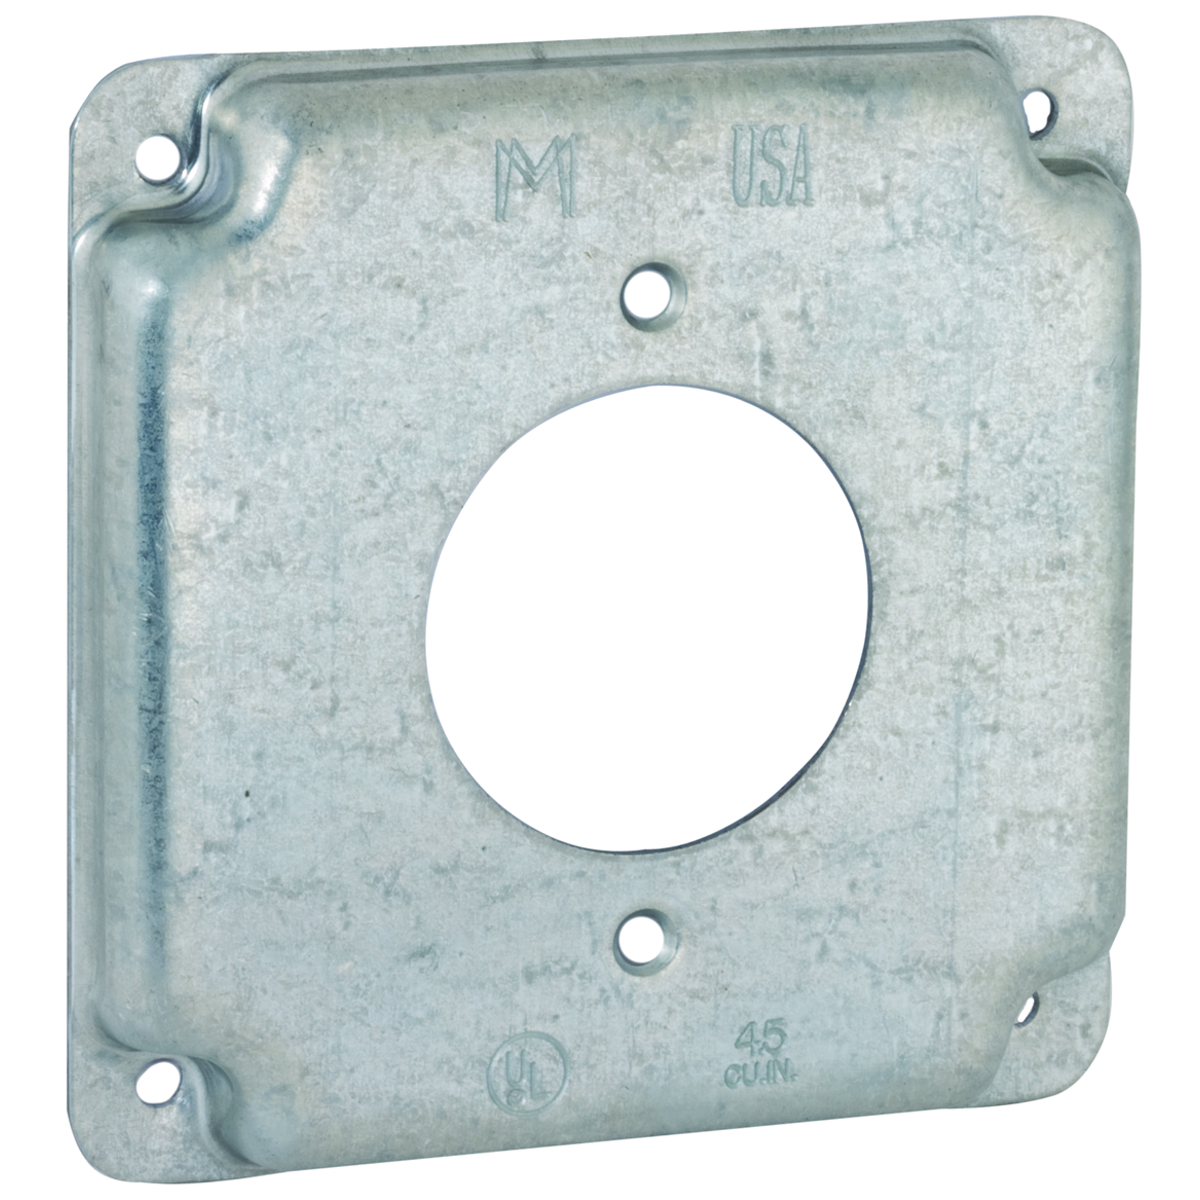 RACO 811C 4" SQUARE EXPOSED WORK COVER, 30A TWIST-LOCK 1.719" MAY BE TO BIG FOR SOME 30AMP RECEPTACLES